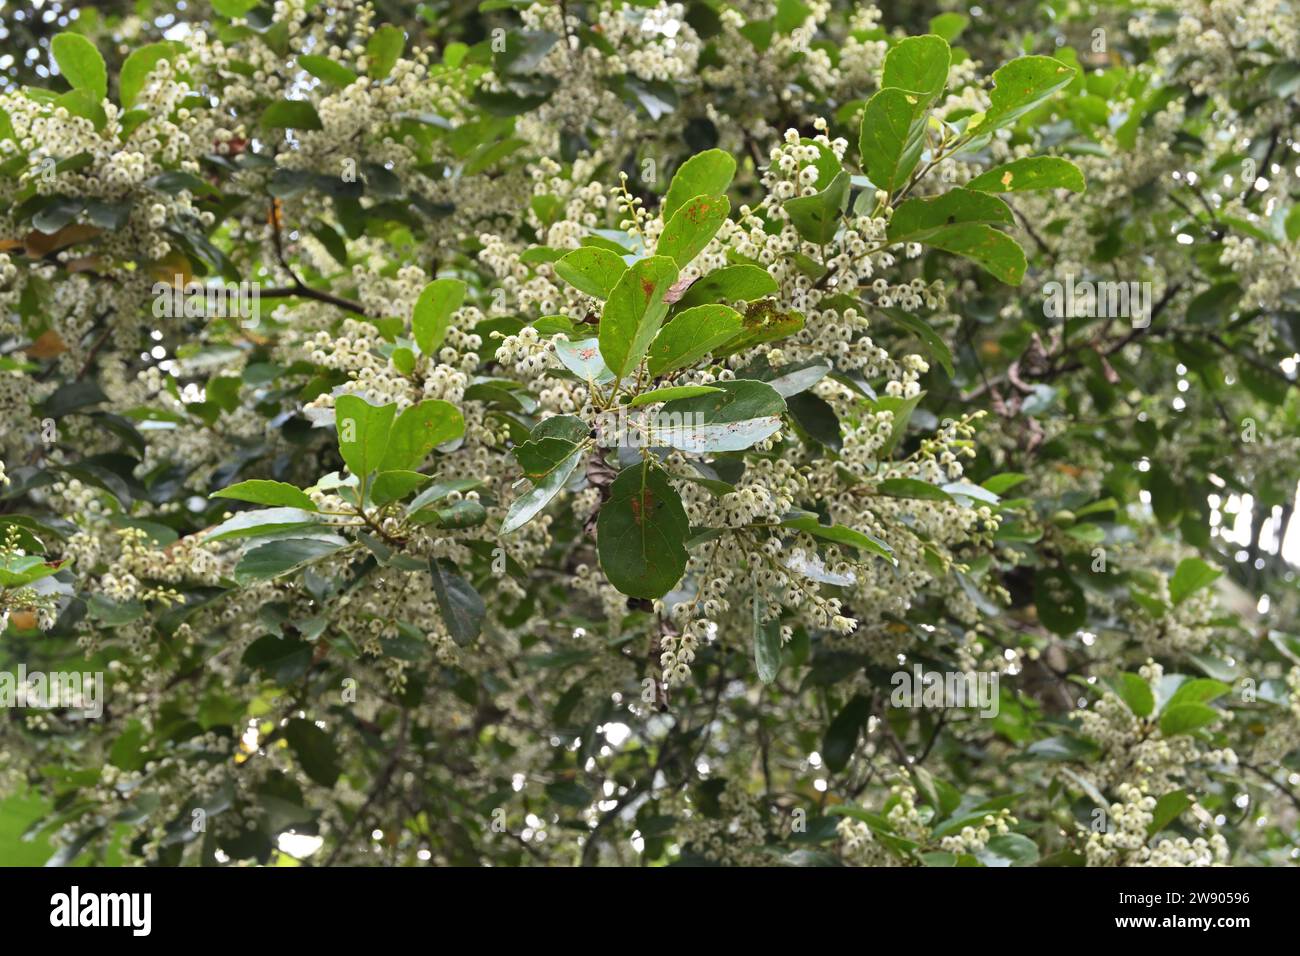 Beautiful view of the twig end of a Ceylon olive tree (Elaeocarpus Serratus), with fresh leaves and flower buds. The flowering other twigs are in the Stock Photo